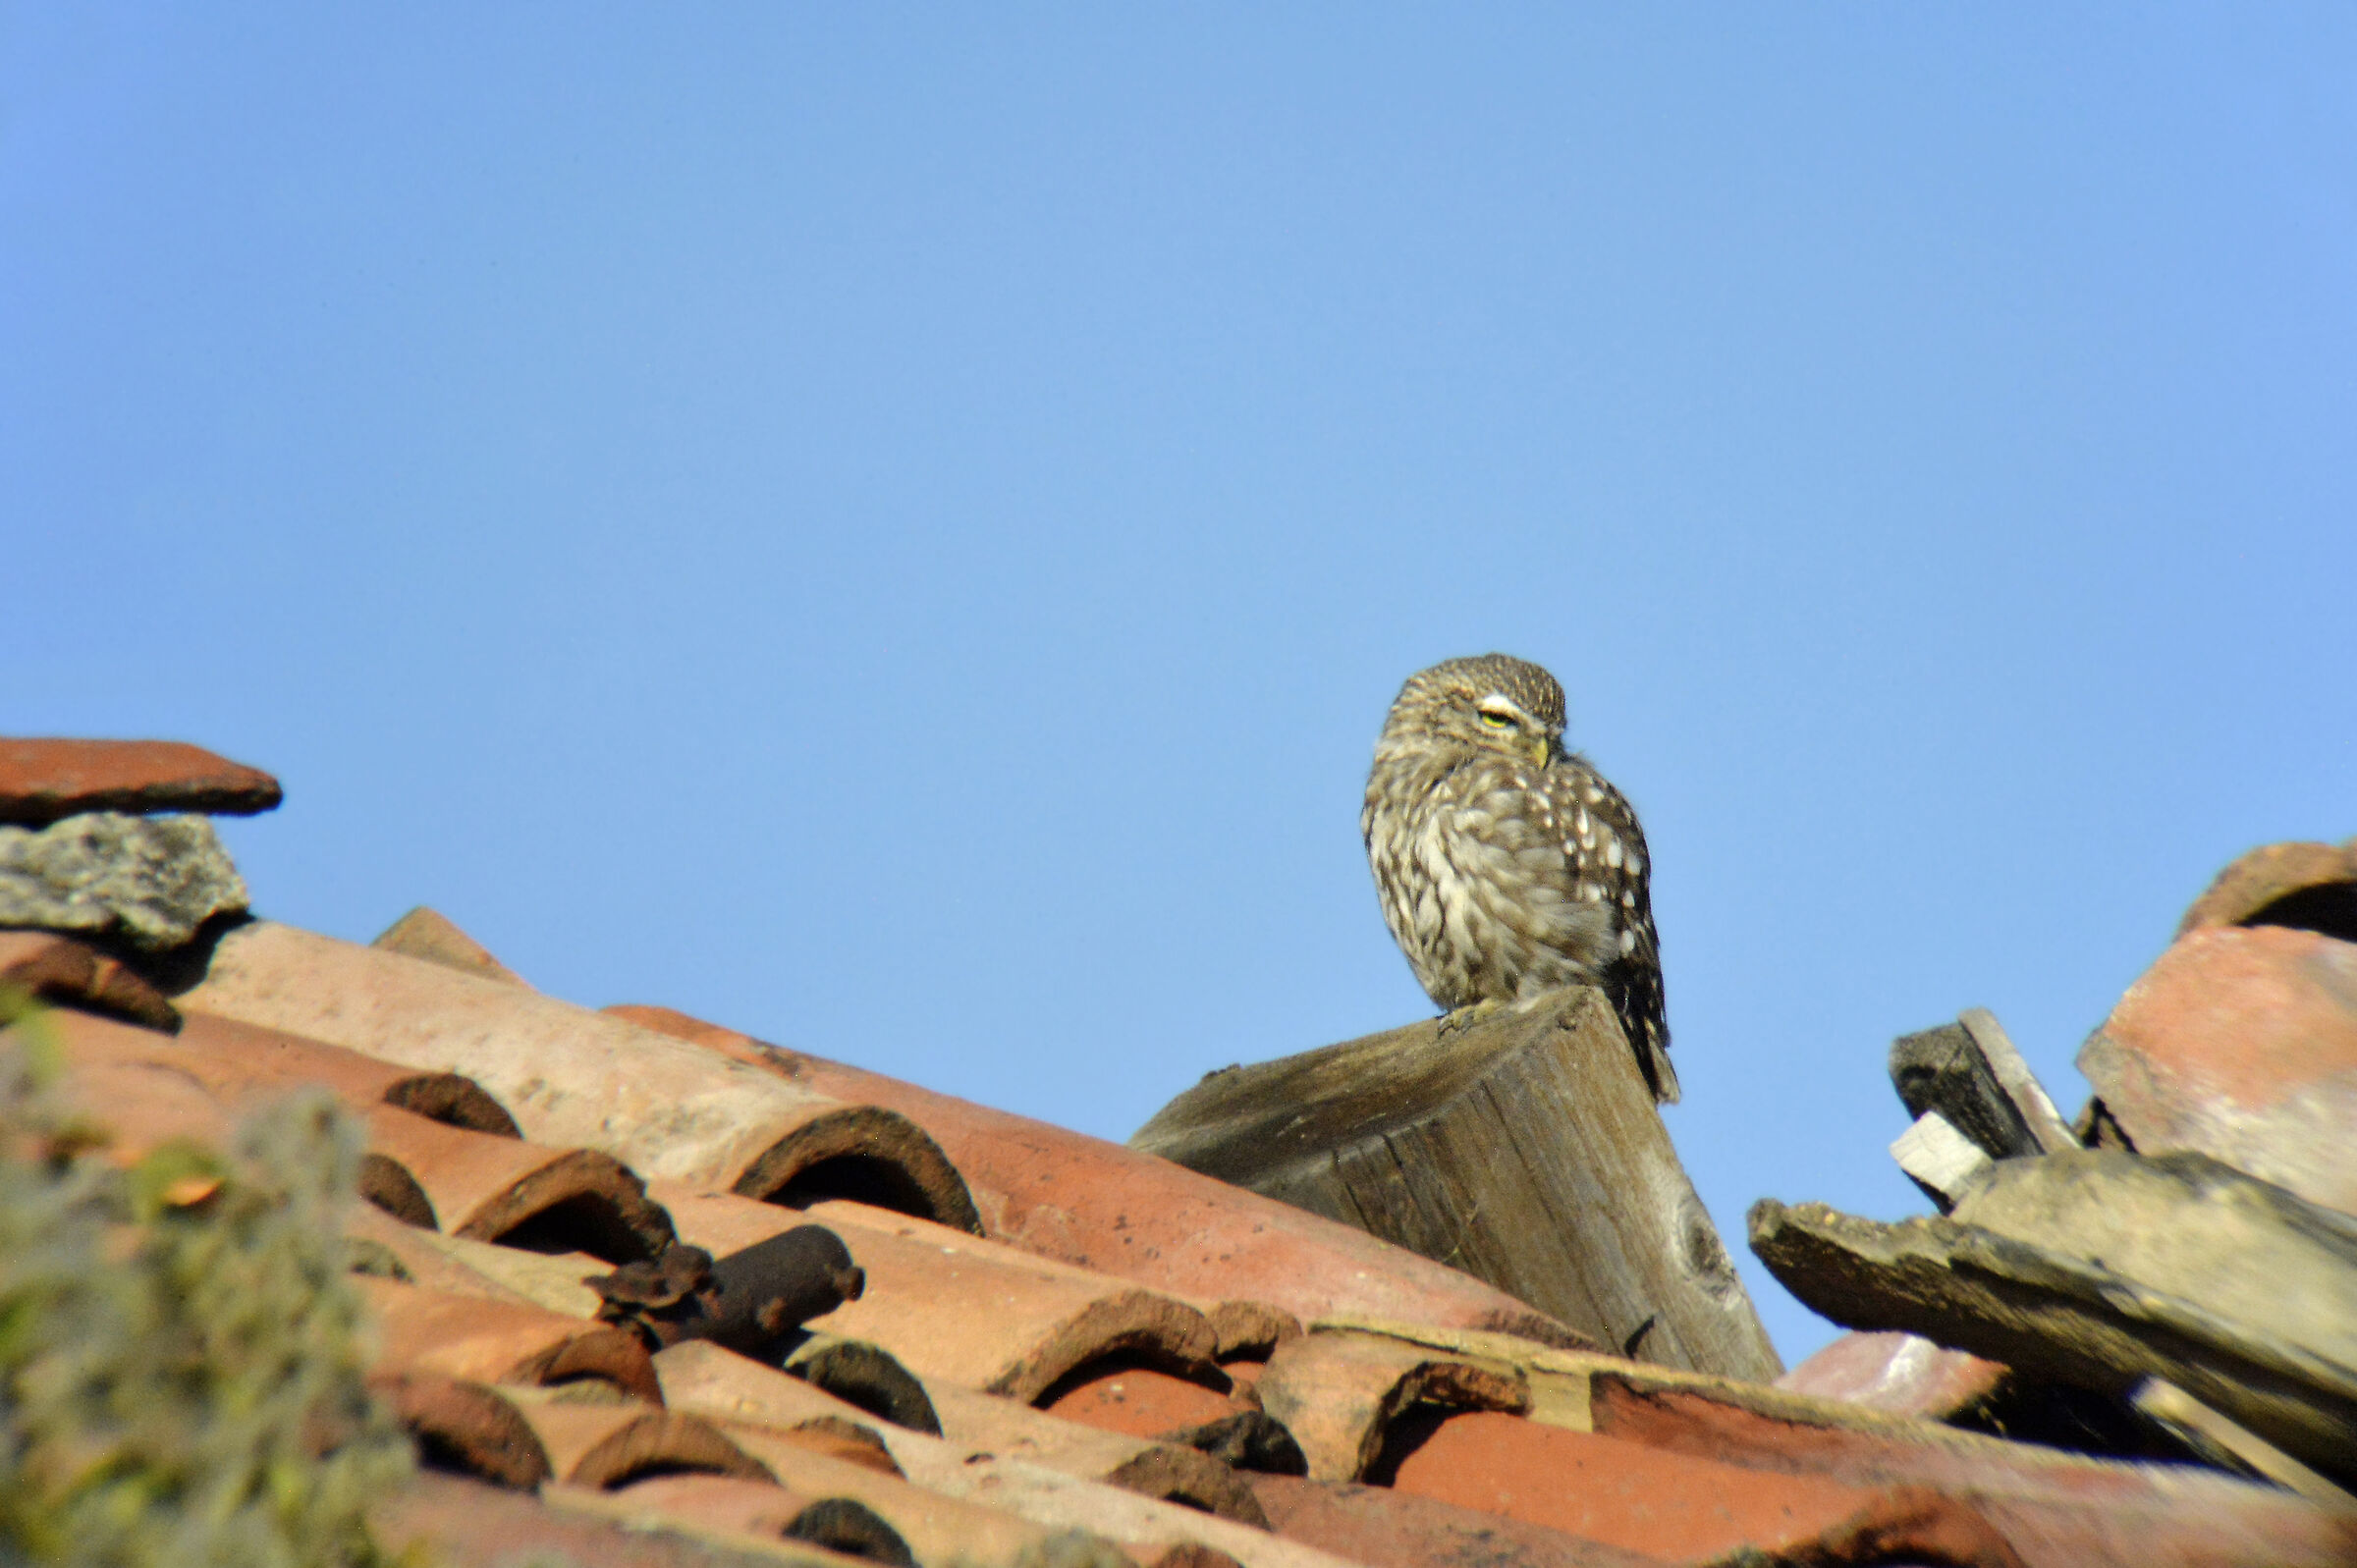 Owl on the roof...